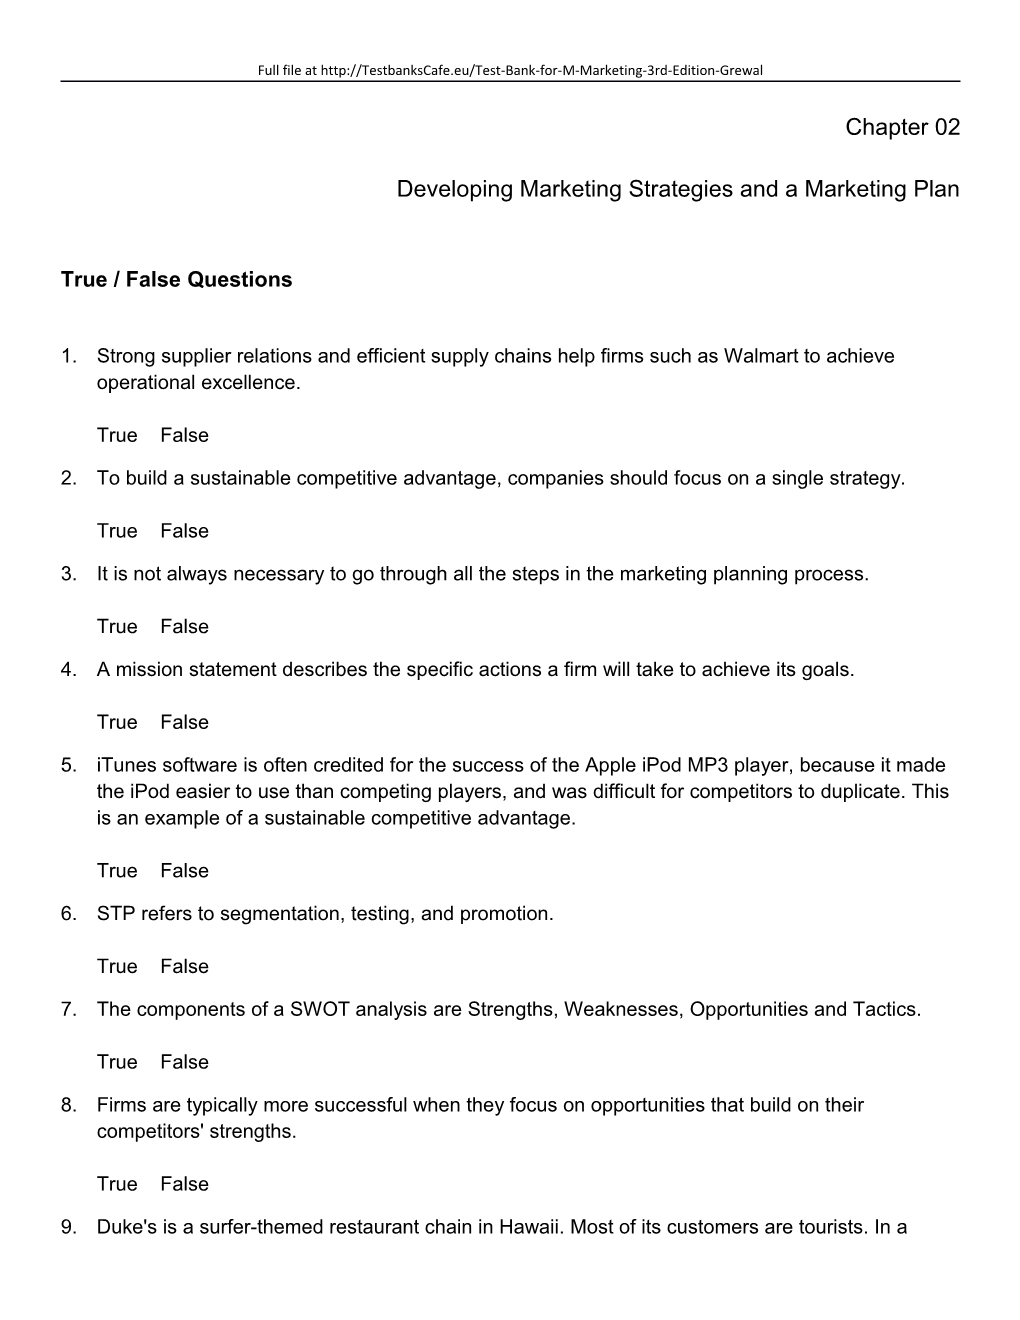 Developing Marketing Strategies and a Marketing Plan